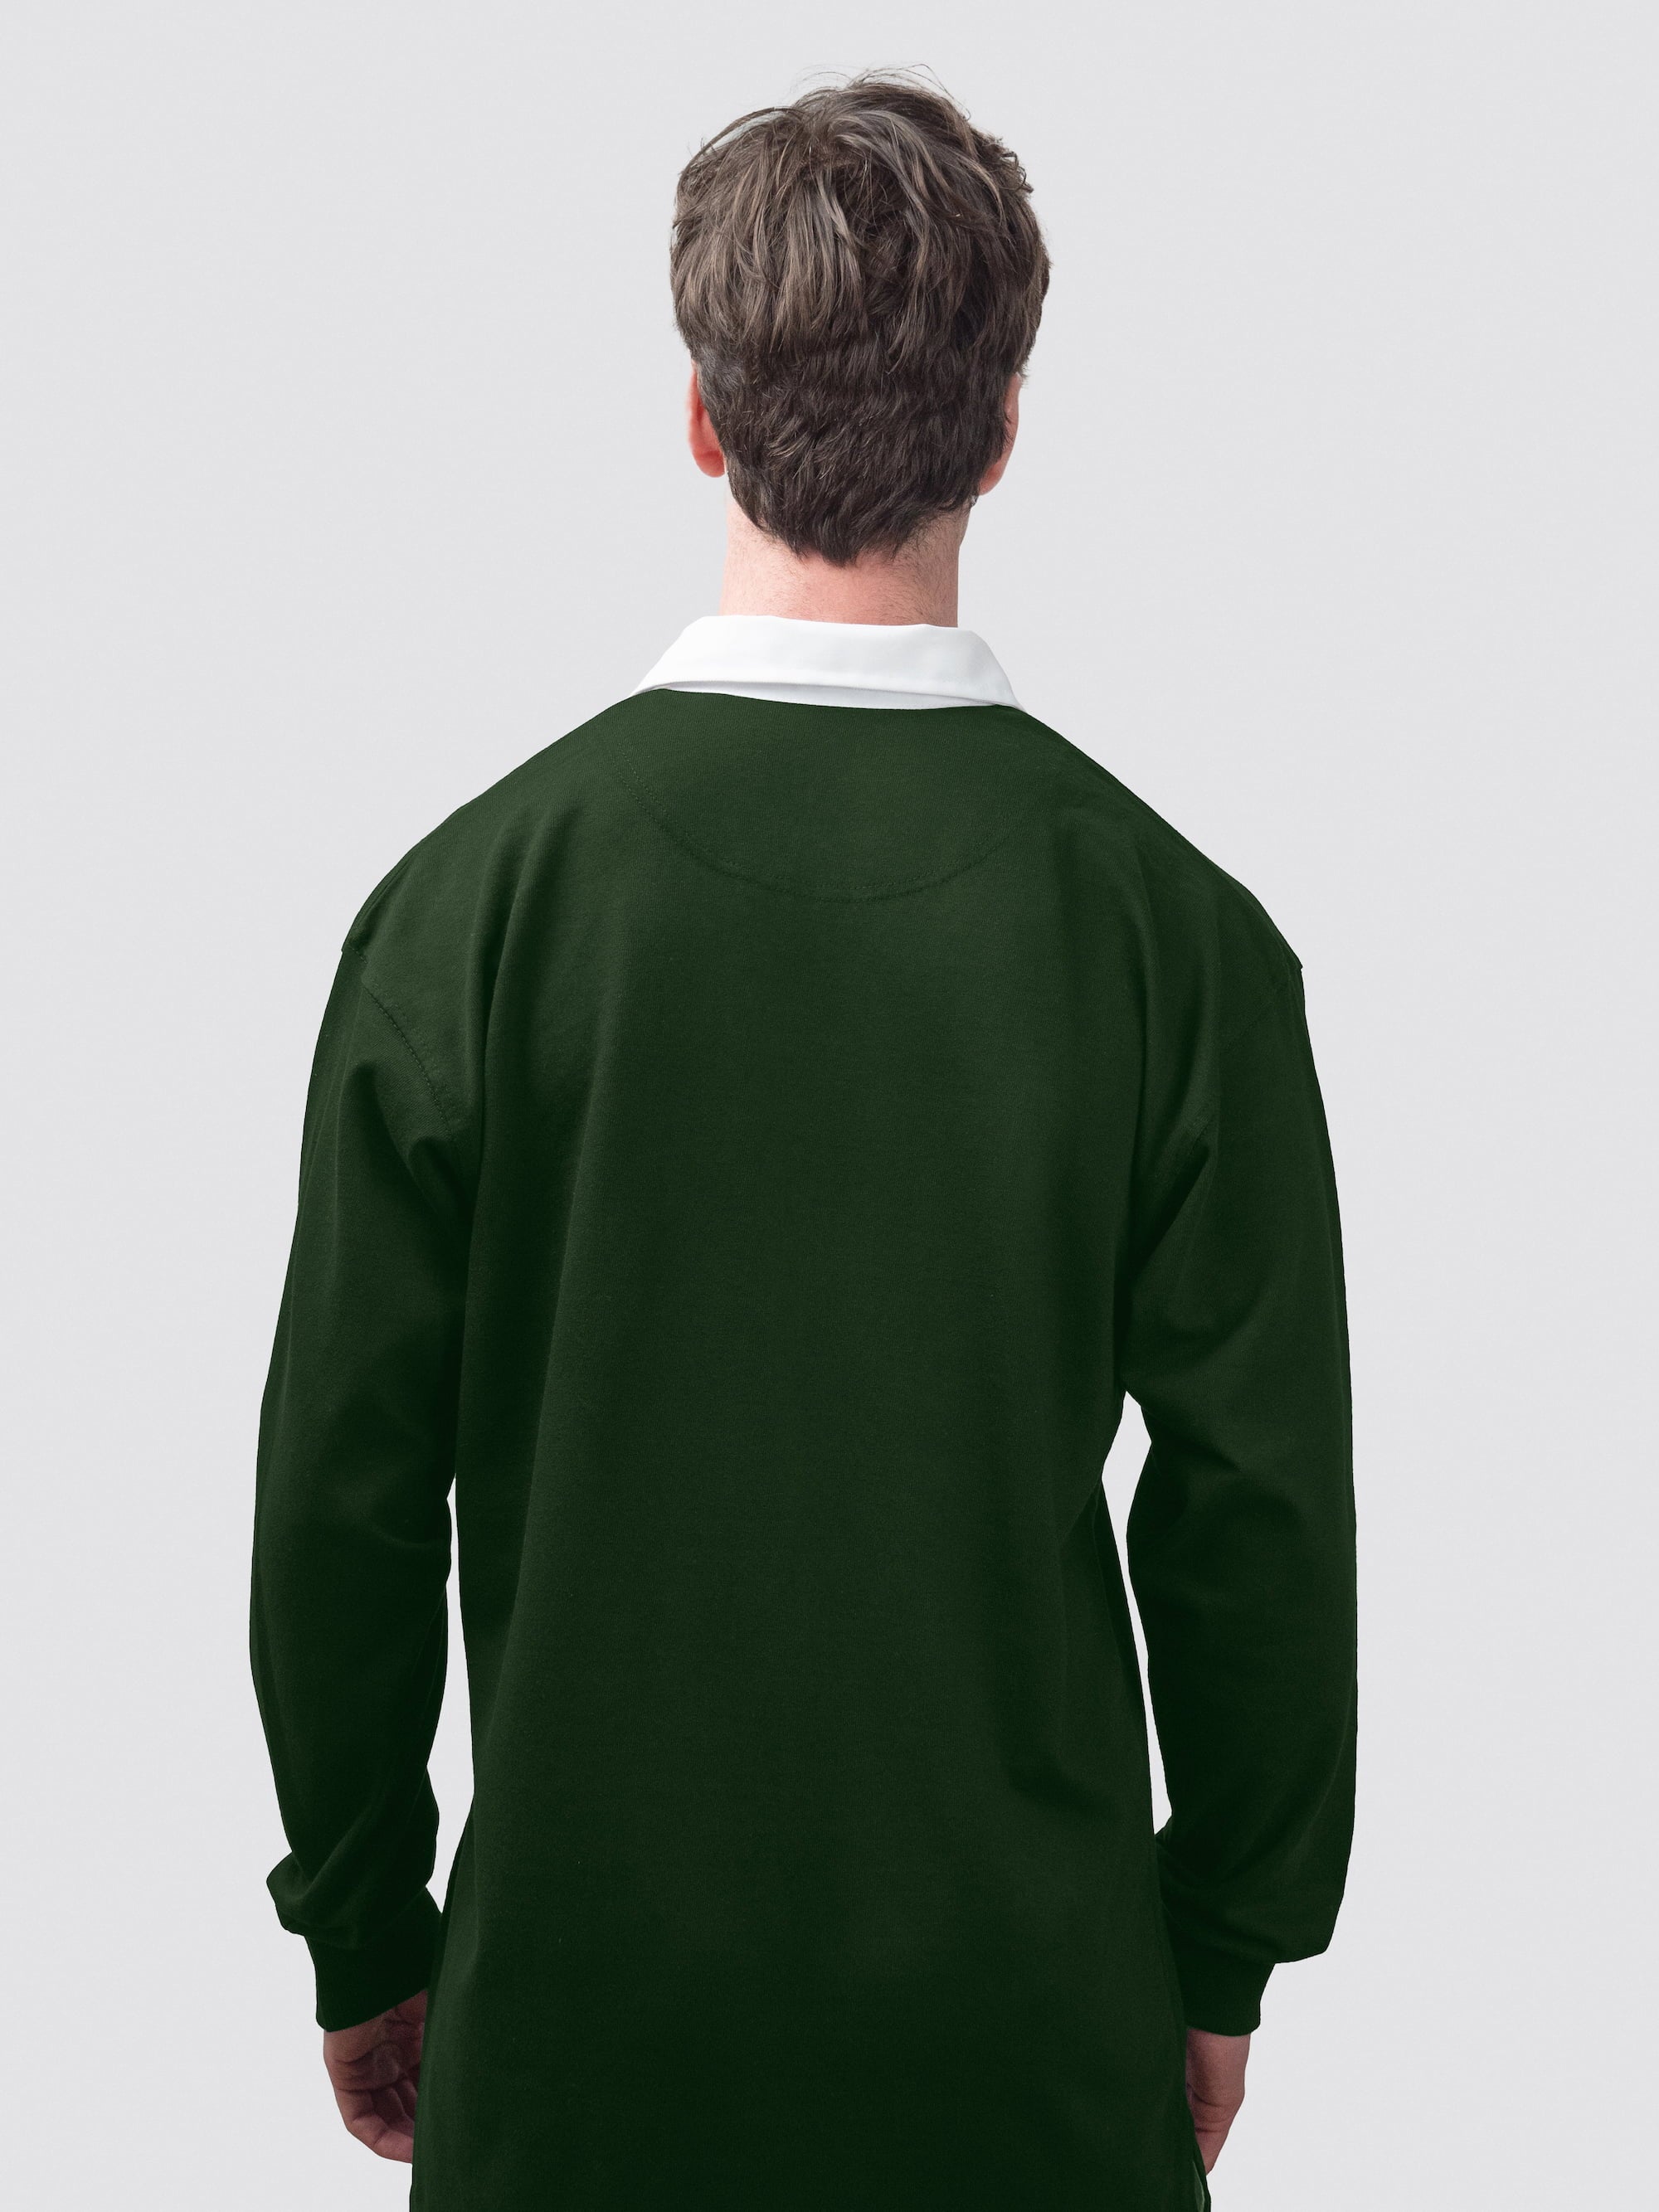 Classic fit, Cambridge University rugby shirt in Bottle Green